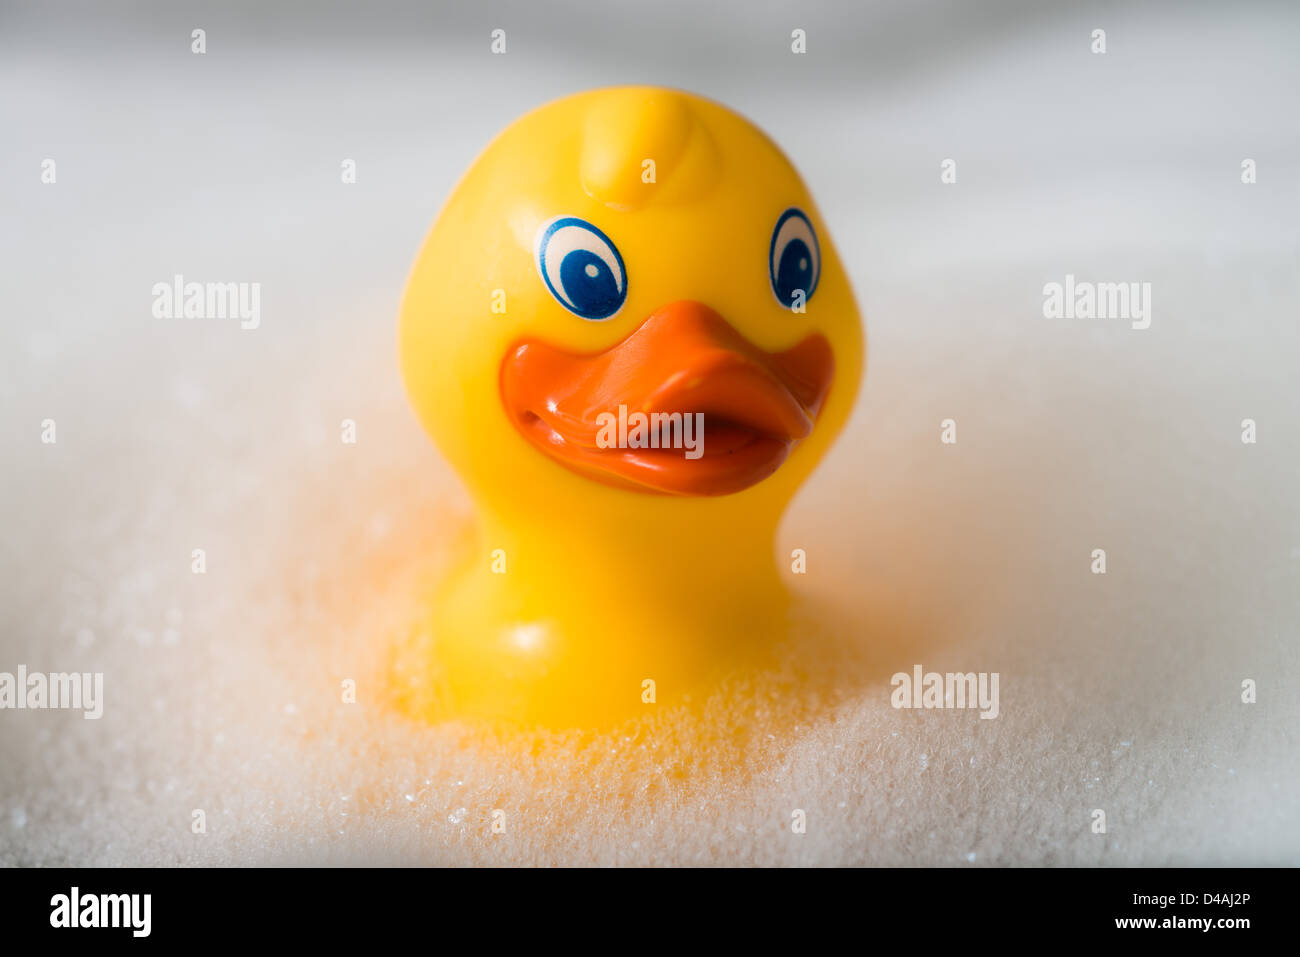 Yellow rubber duck in a bath surrounded by bubbles Stock Photo